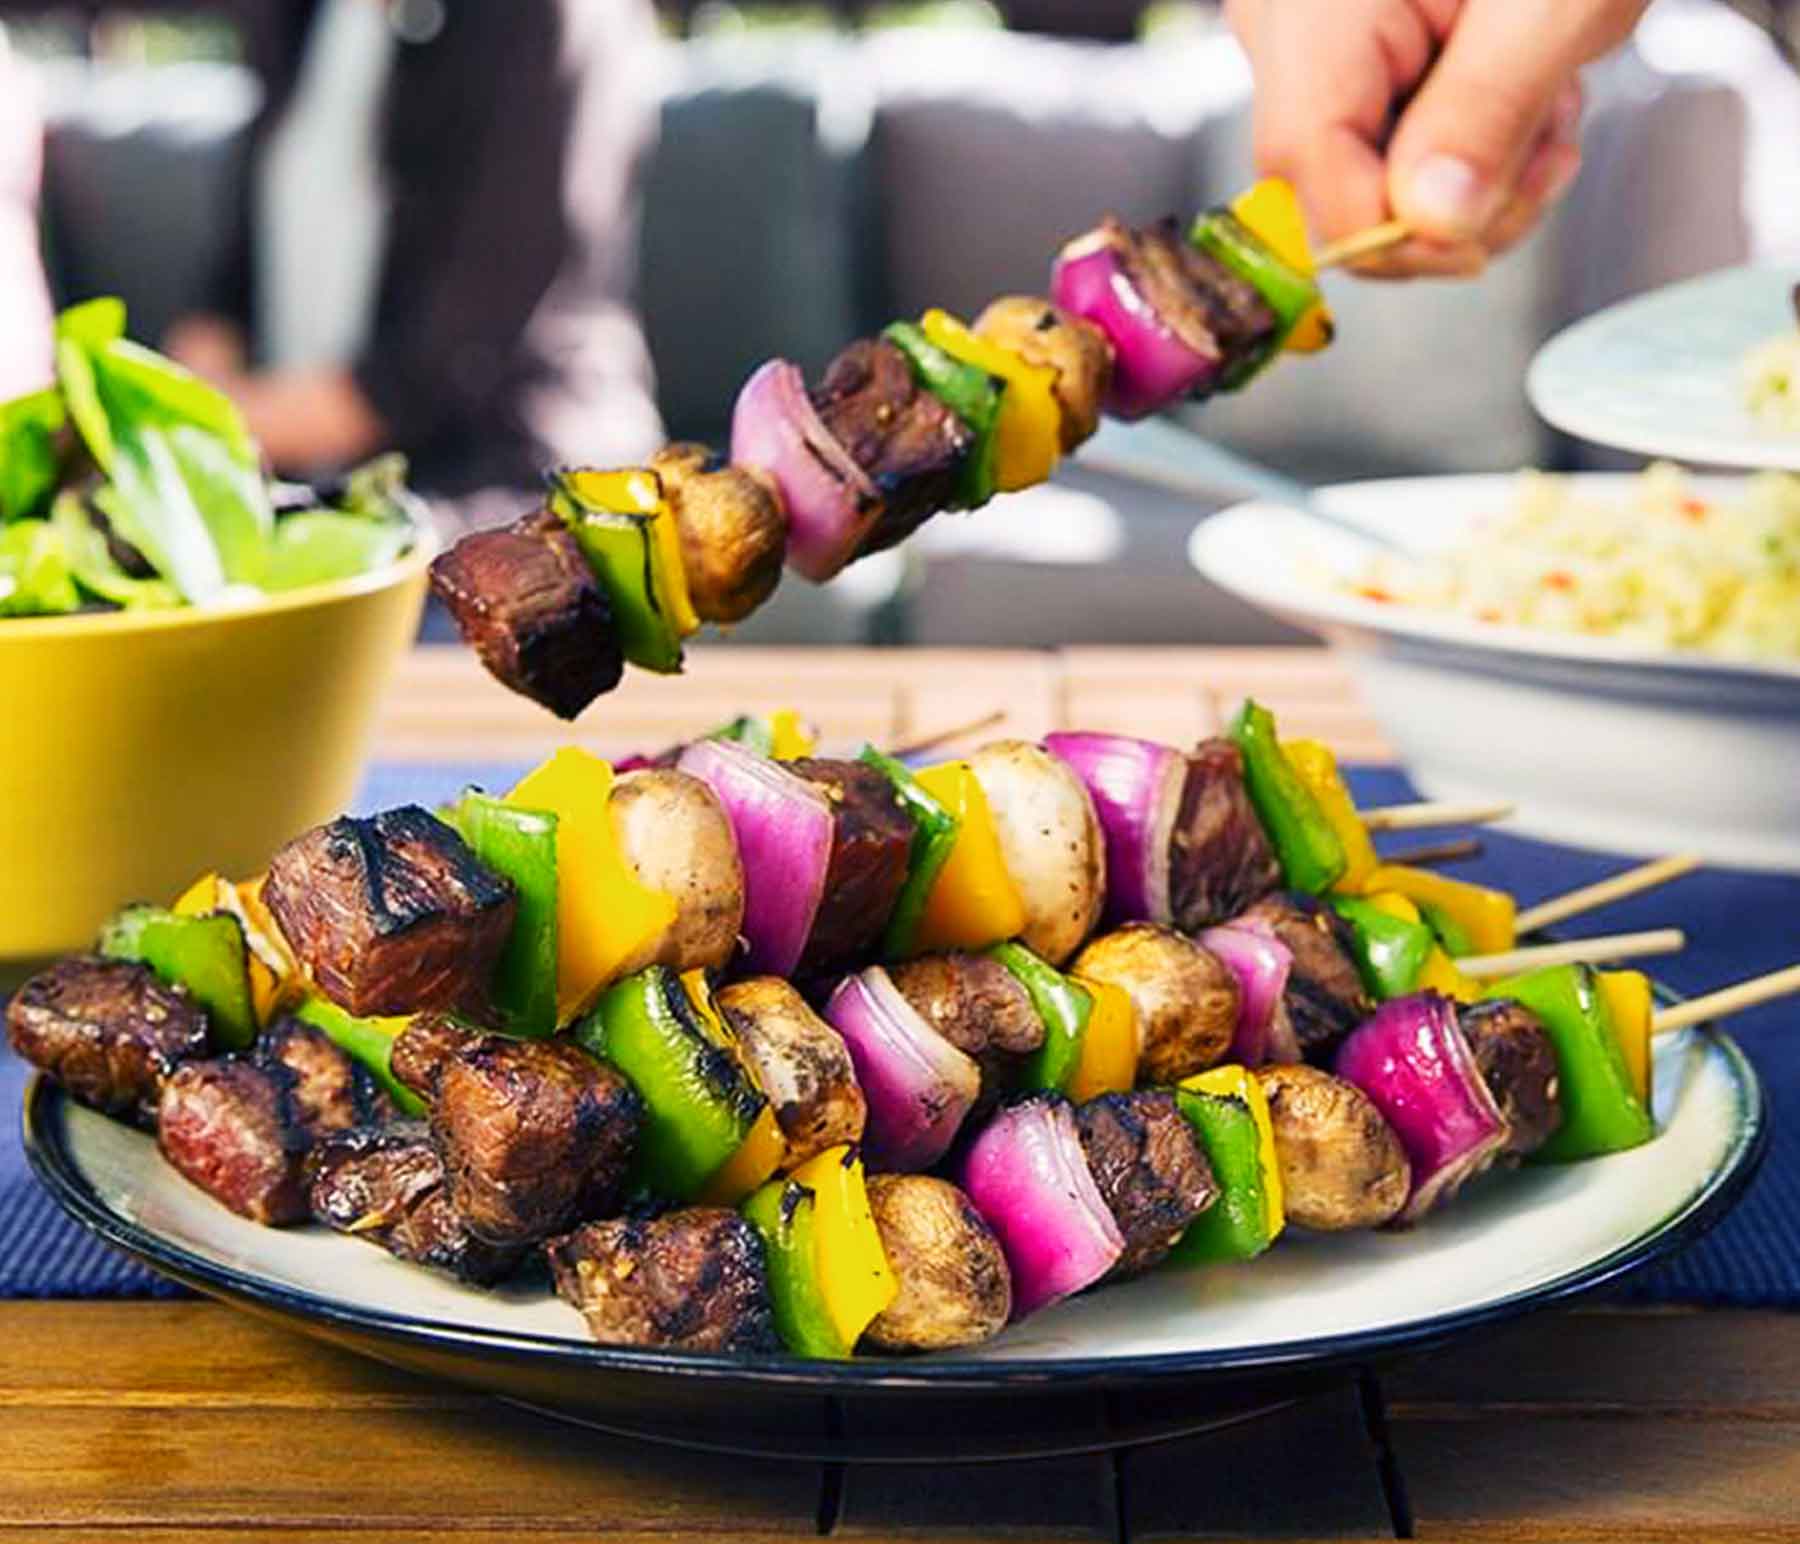 How to Make Skewers for Pork, Chicken, Steak, and More